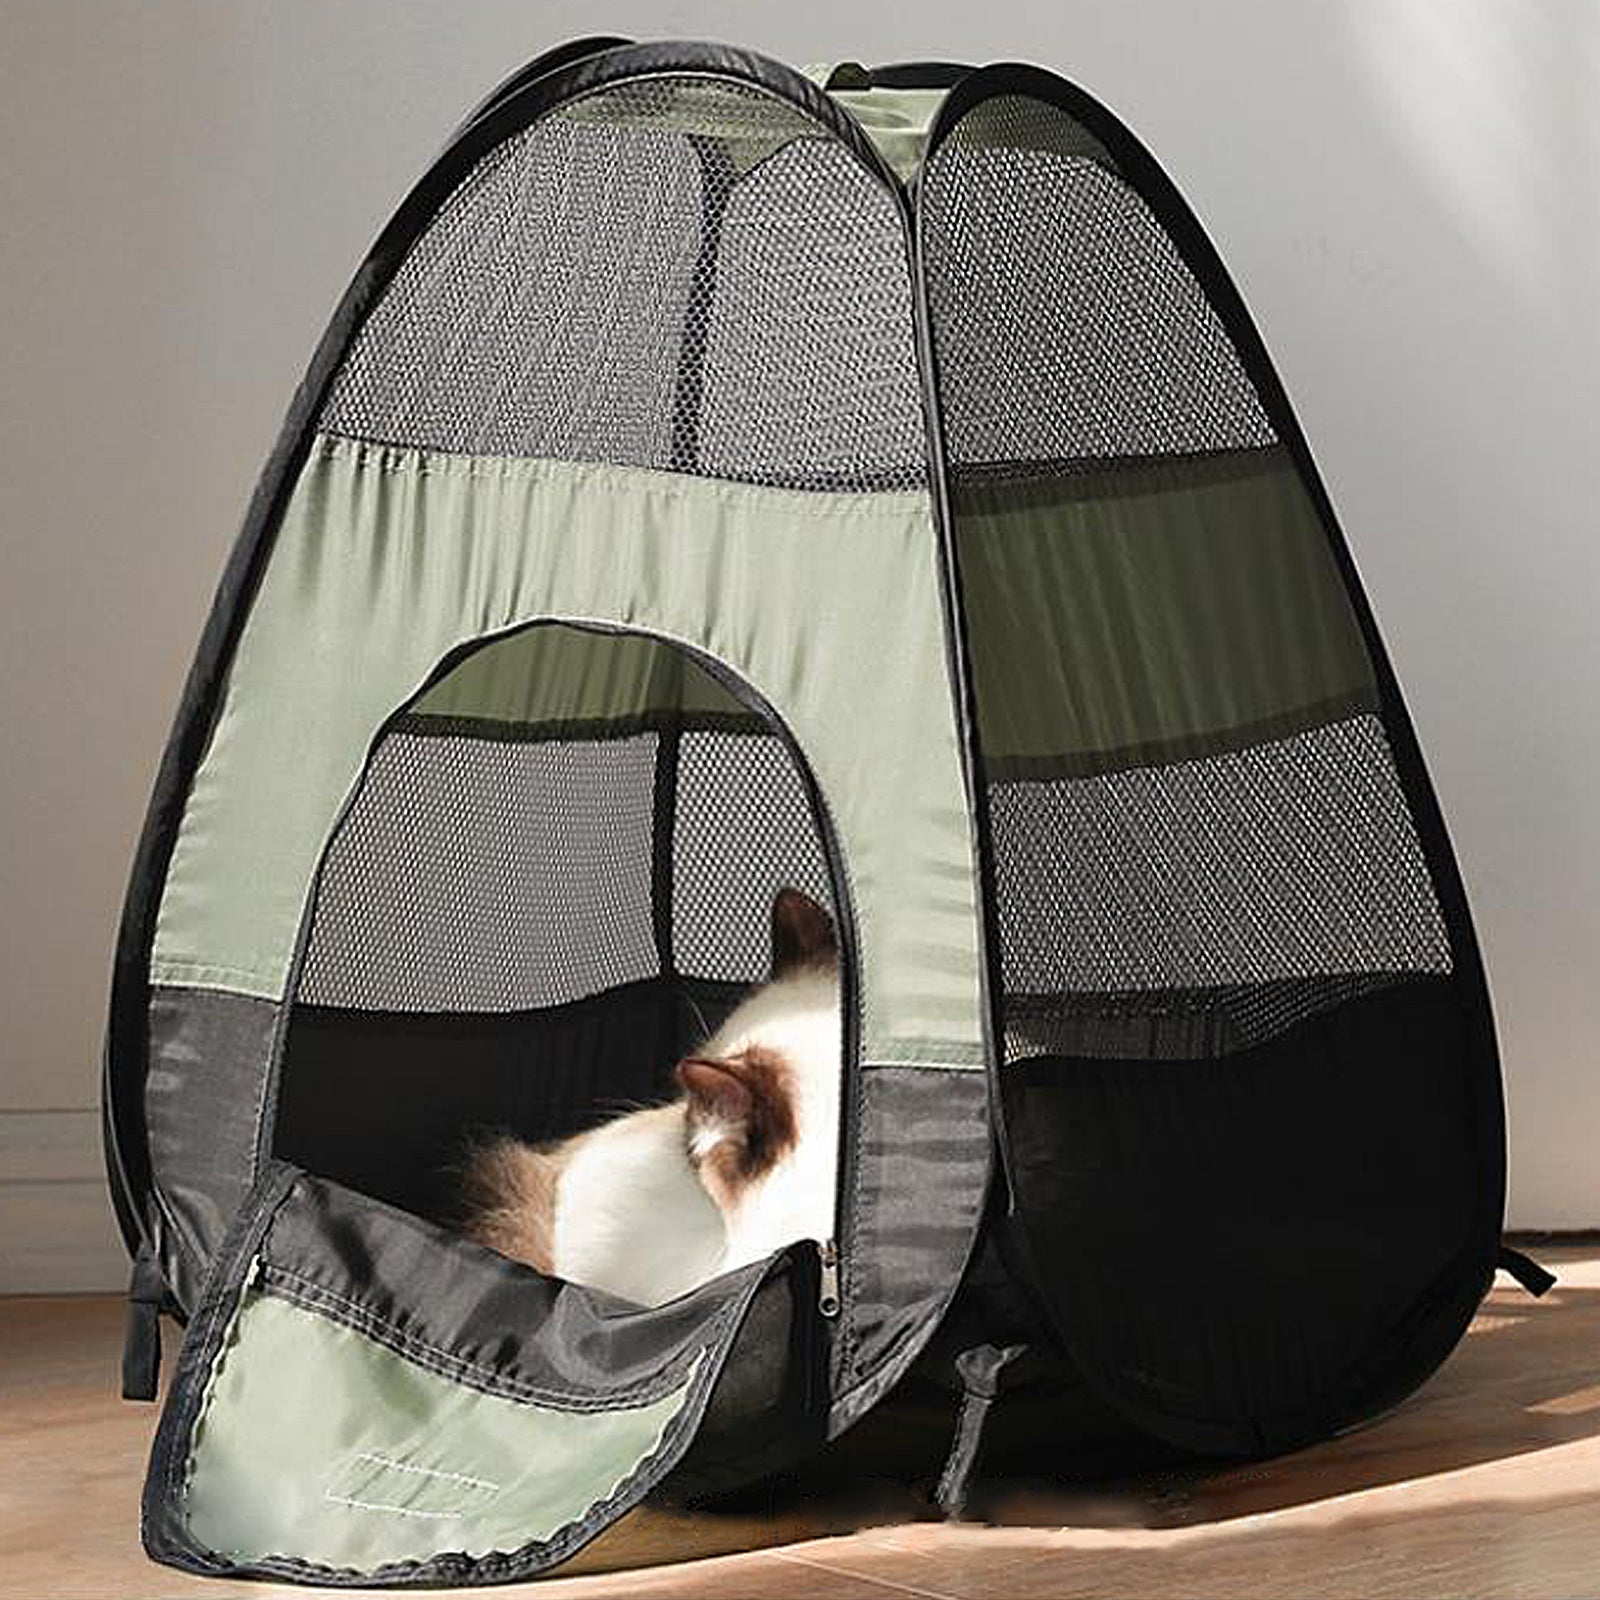 Moonvvin Yard Fence Pet Cage Removable Breathable Outdoor Folding Mesh Dog Tent